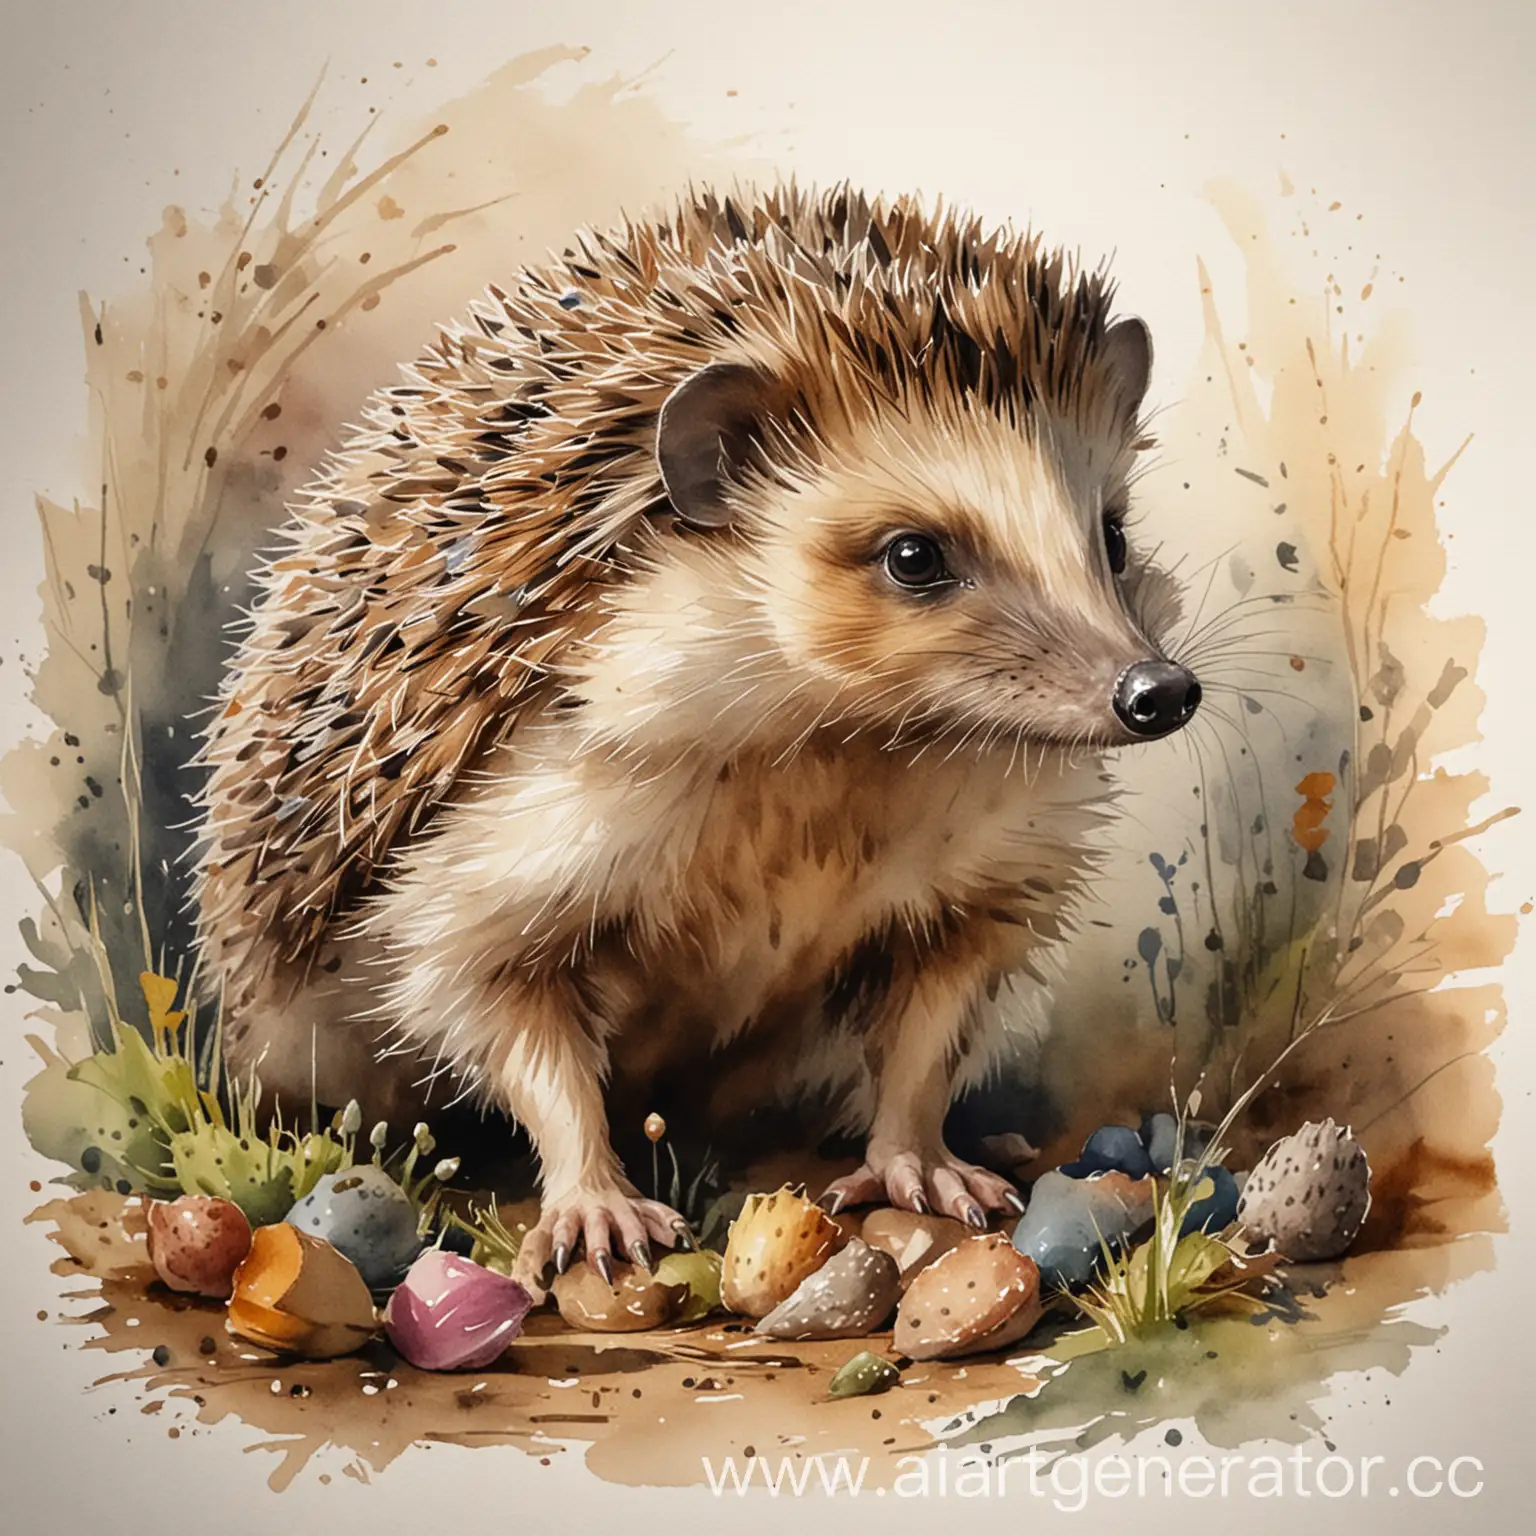 Beatrix-Potter-Inspired-Watercolor-Hedgehog-Drawing-with-Intricate-Details-and-Playful-Light-and-Shadow